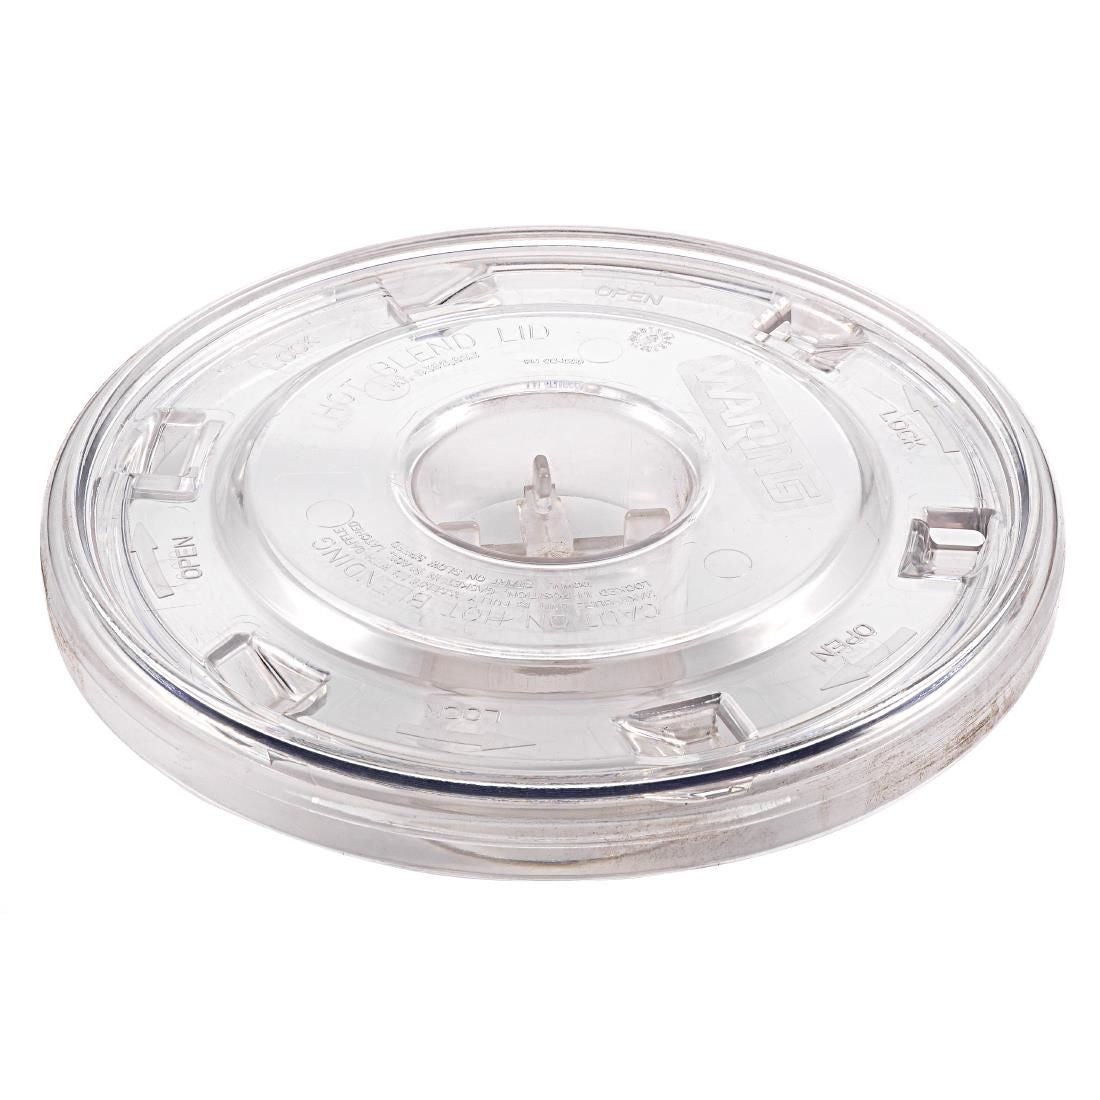 AE726 Waring Polycarbonate Outer Lid